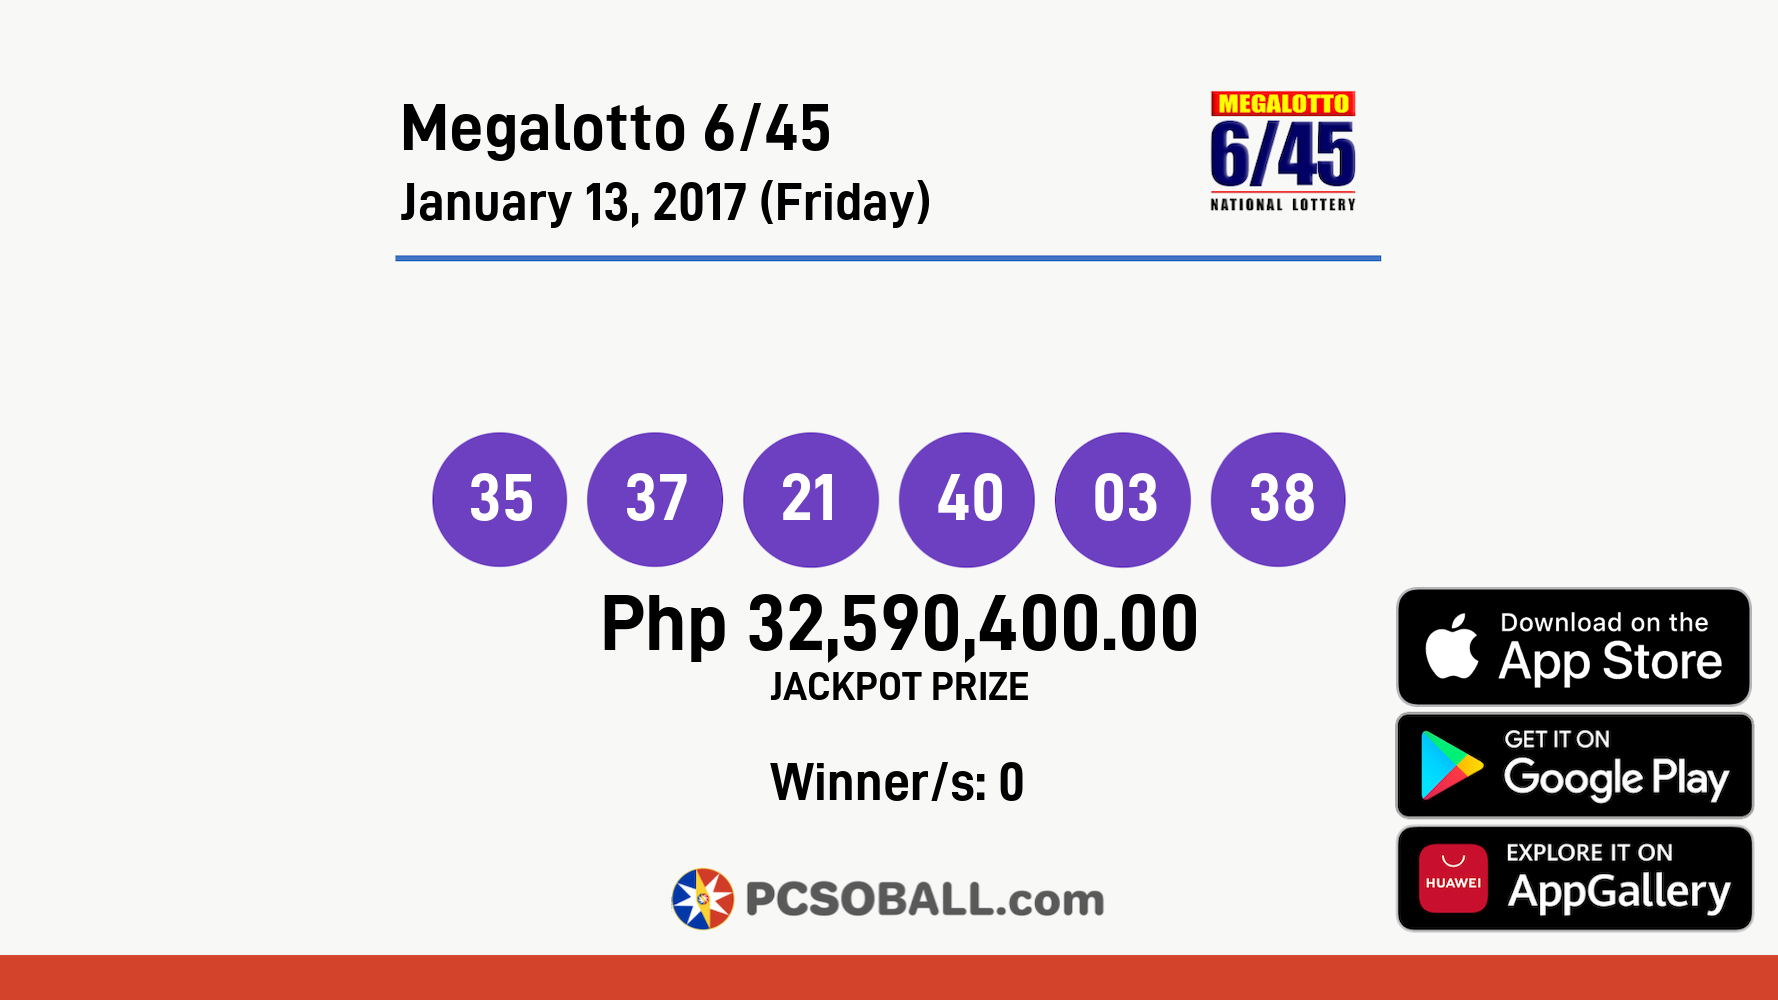 Megalotto 6/45 January 13, 2017 (Friday) Result